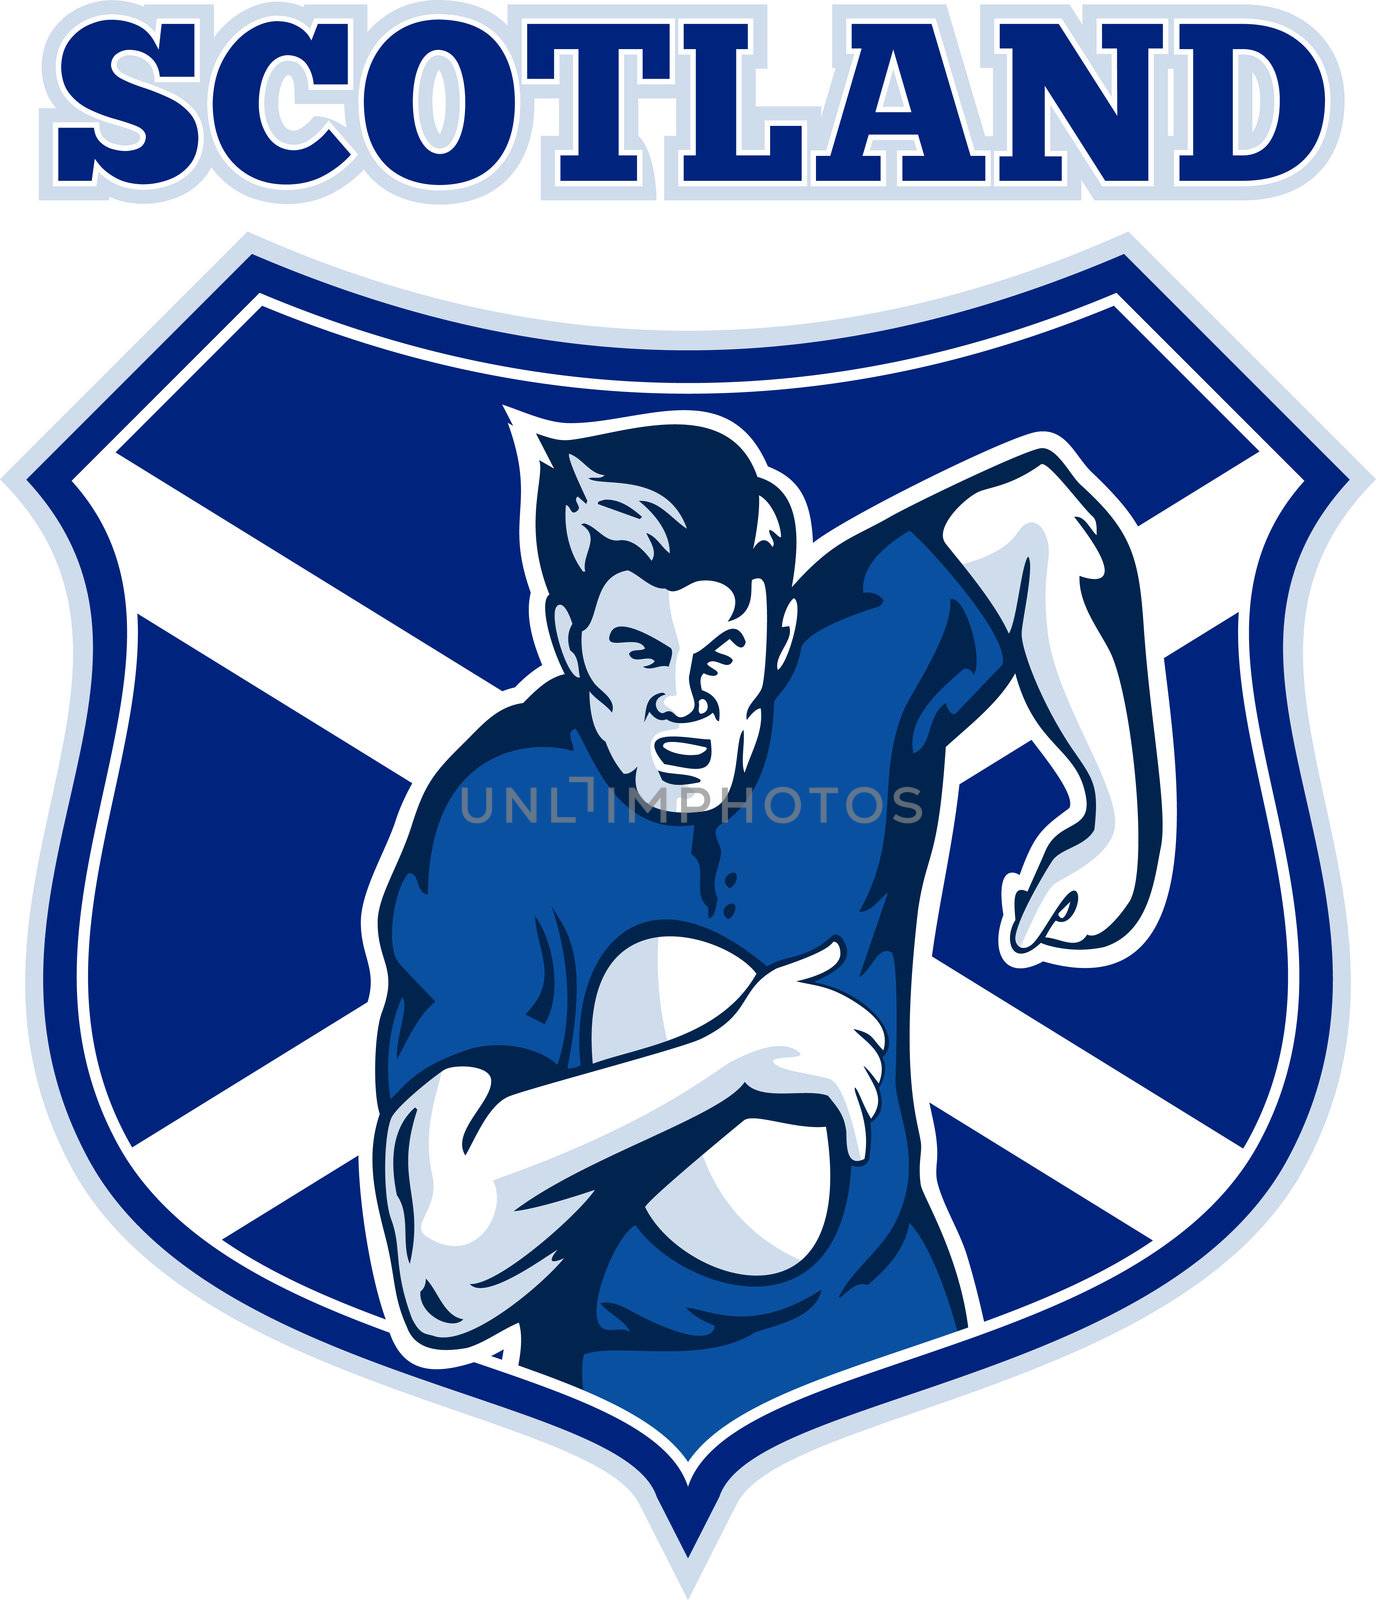 illustration of a Scottish rugby player running with the ball facing front view with Scotland flag shield in background 